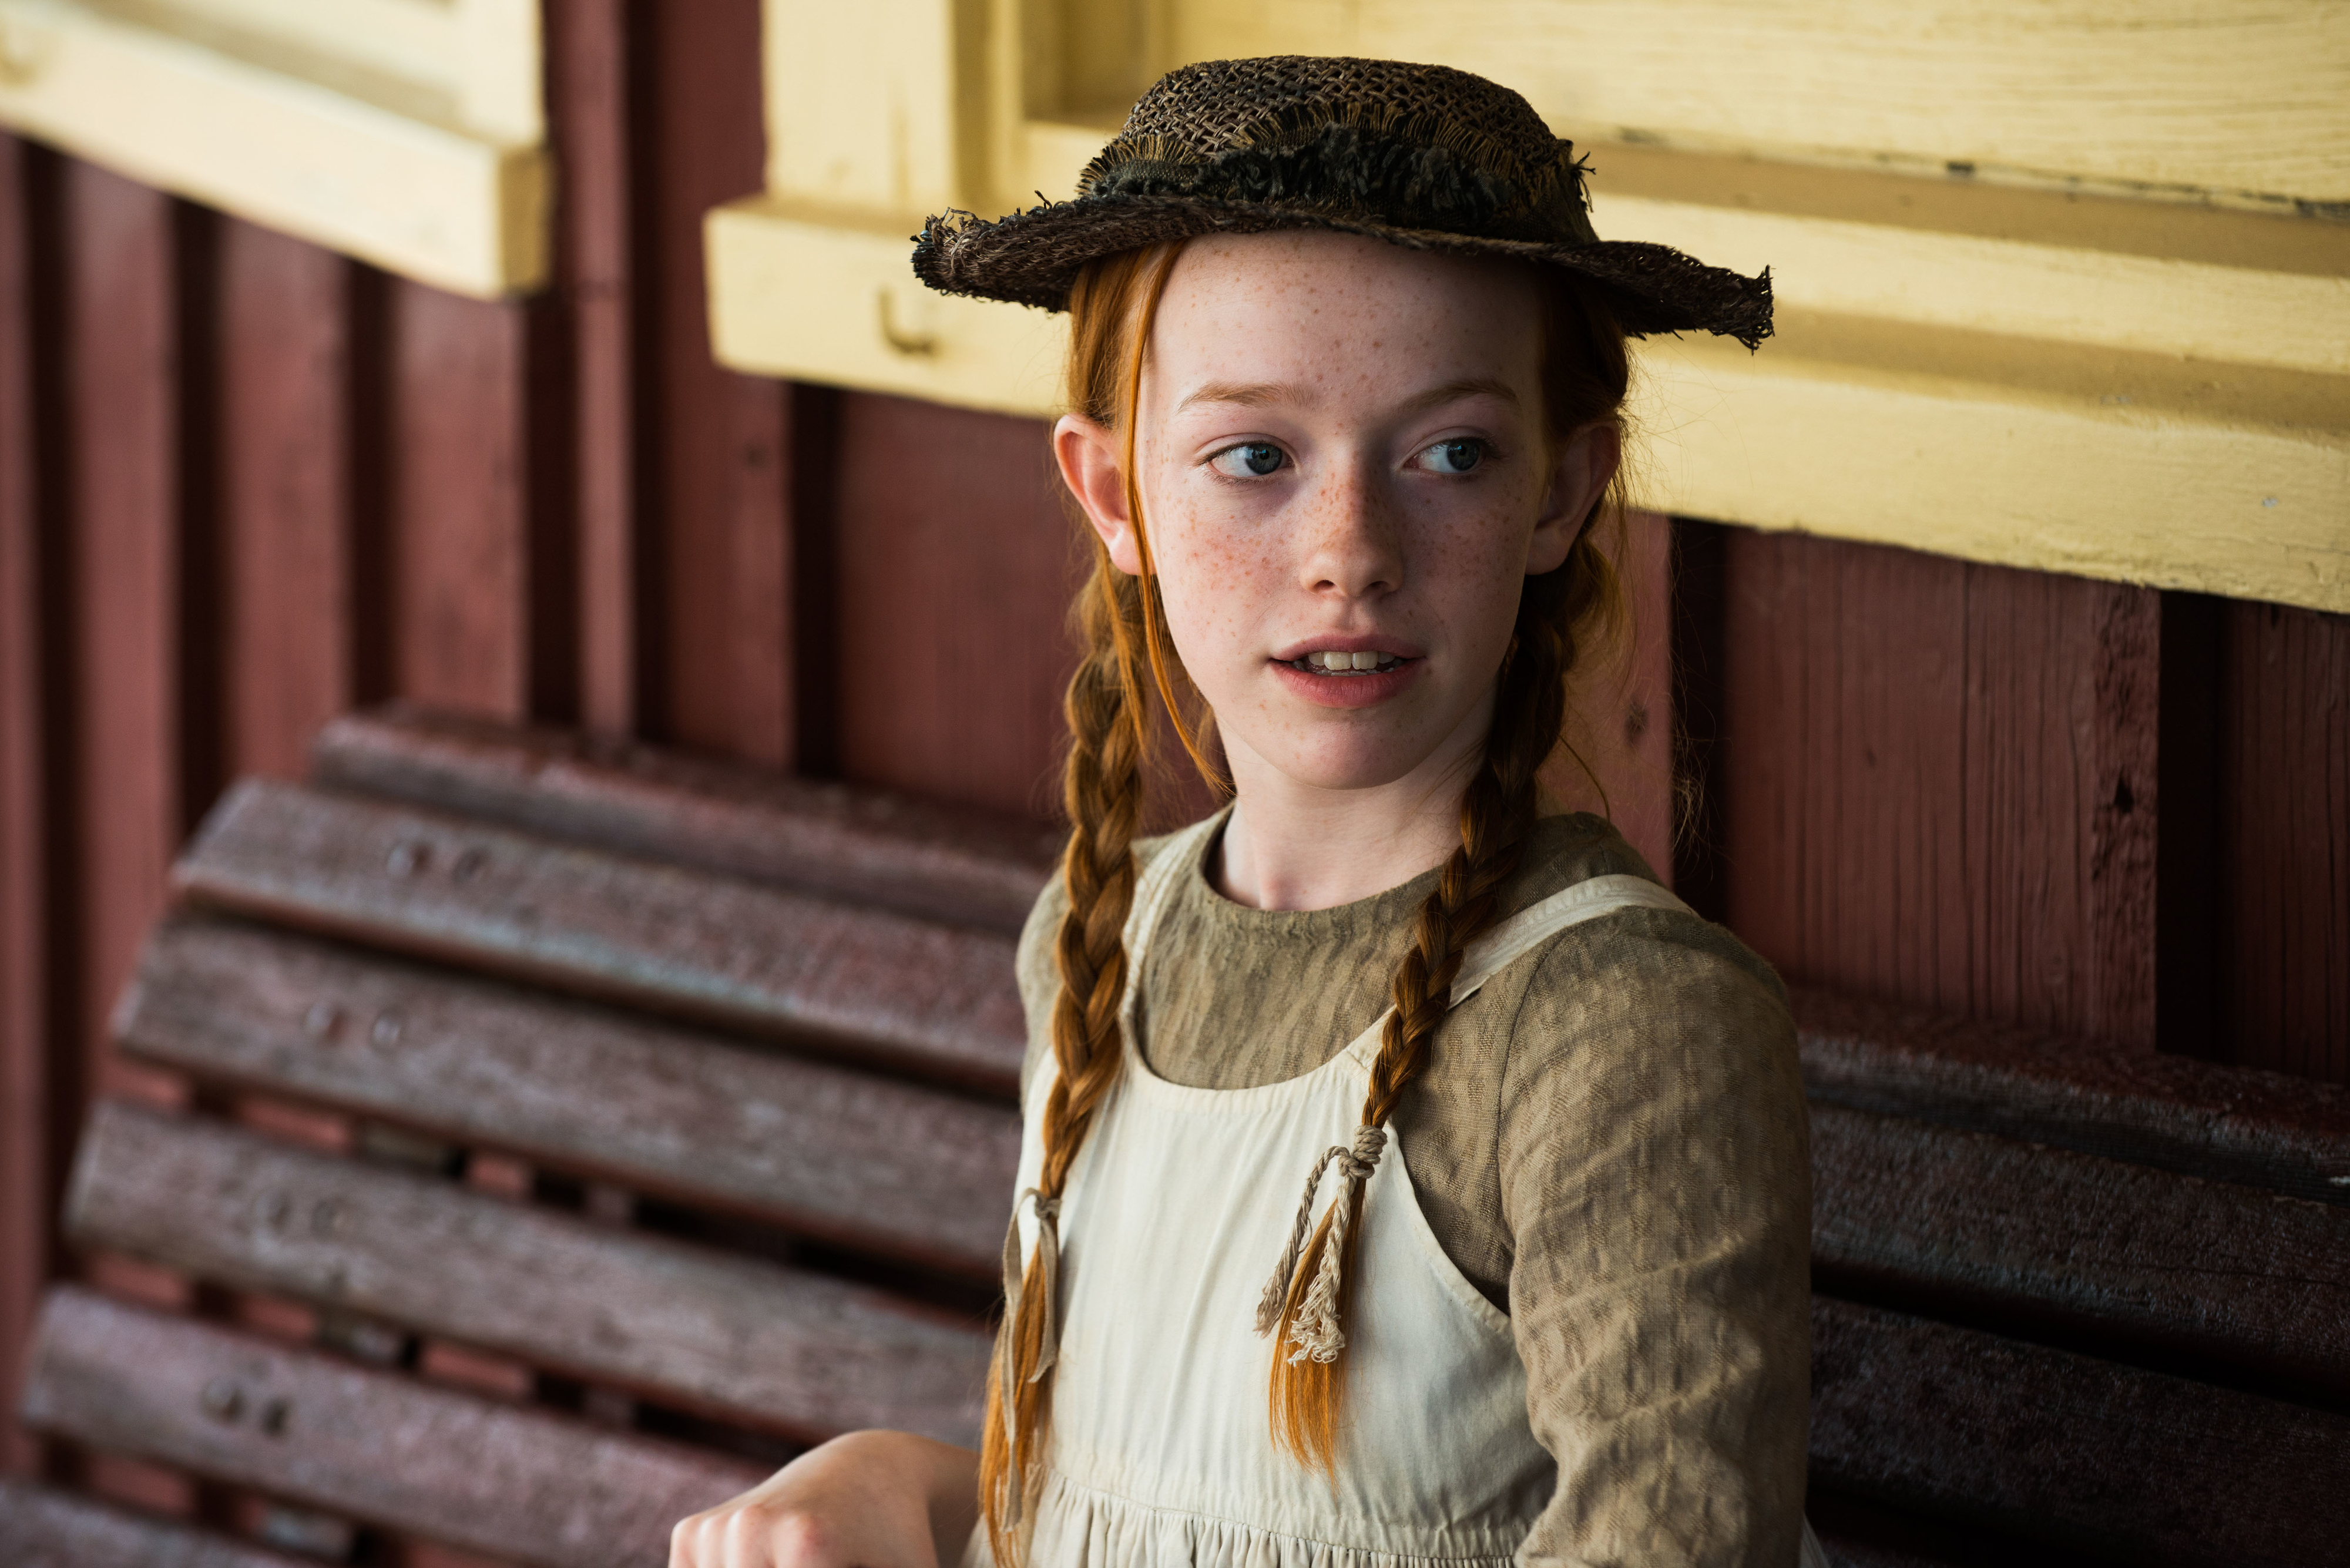 Character Anne from &#x27;Anne of Green Gables&#x27; in period clothing with braids and a straw hat